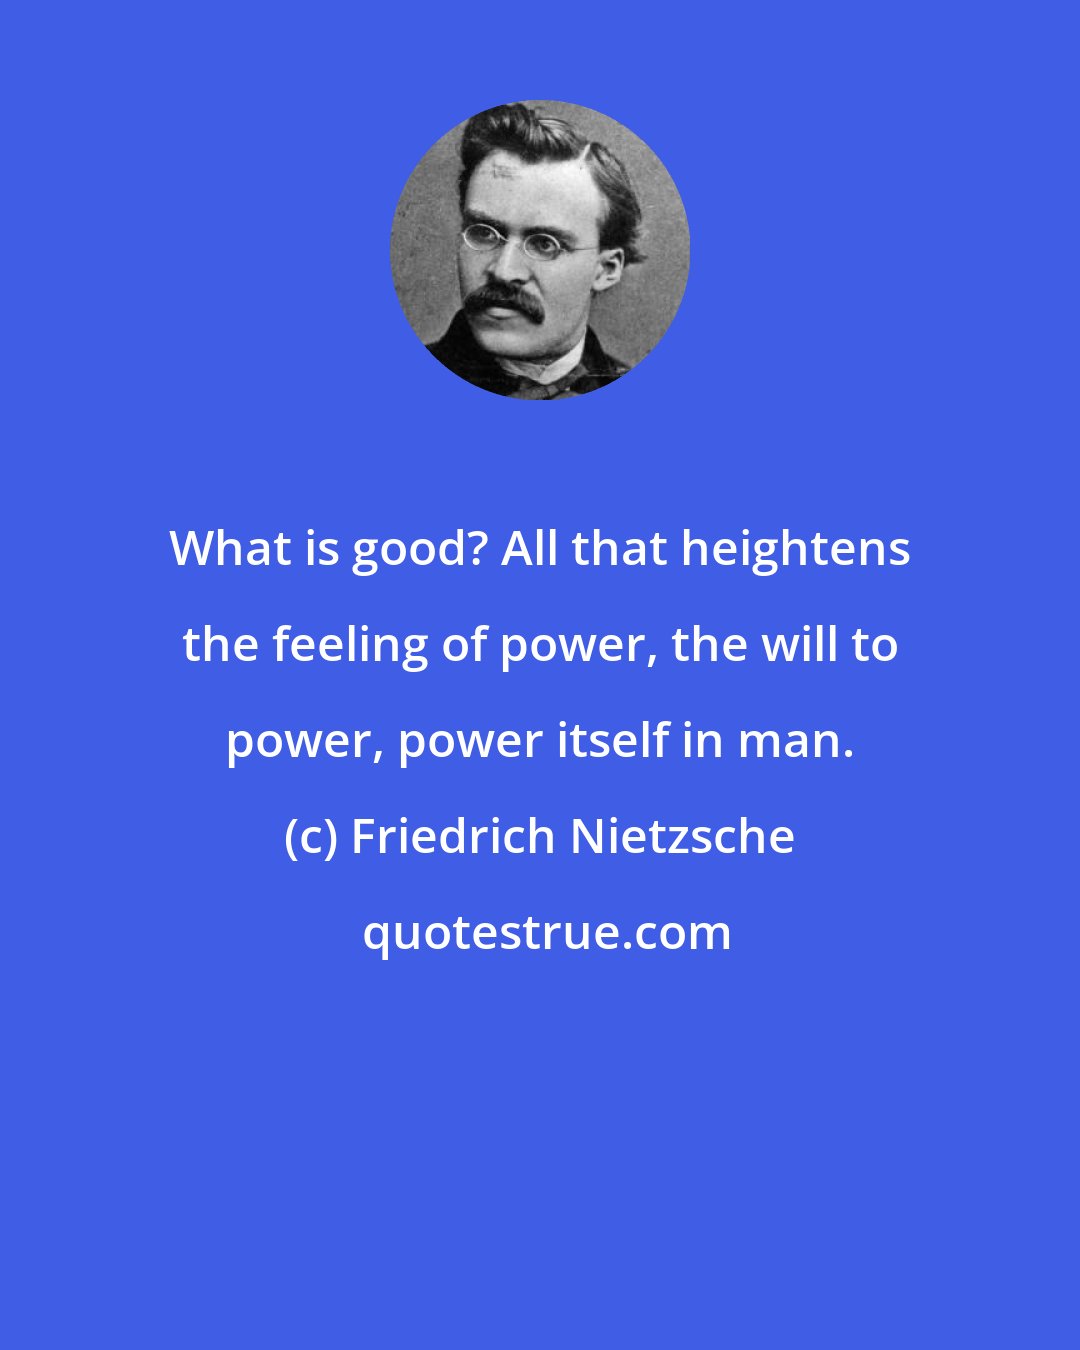 Friedrich Nietzsche: What is good? All that heightens the feeling of power, the will to power, power itself in man.